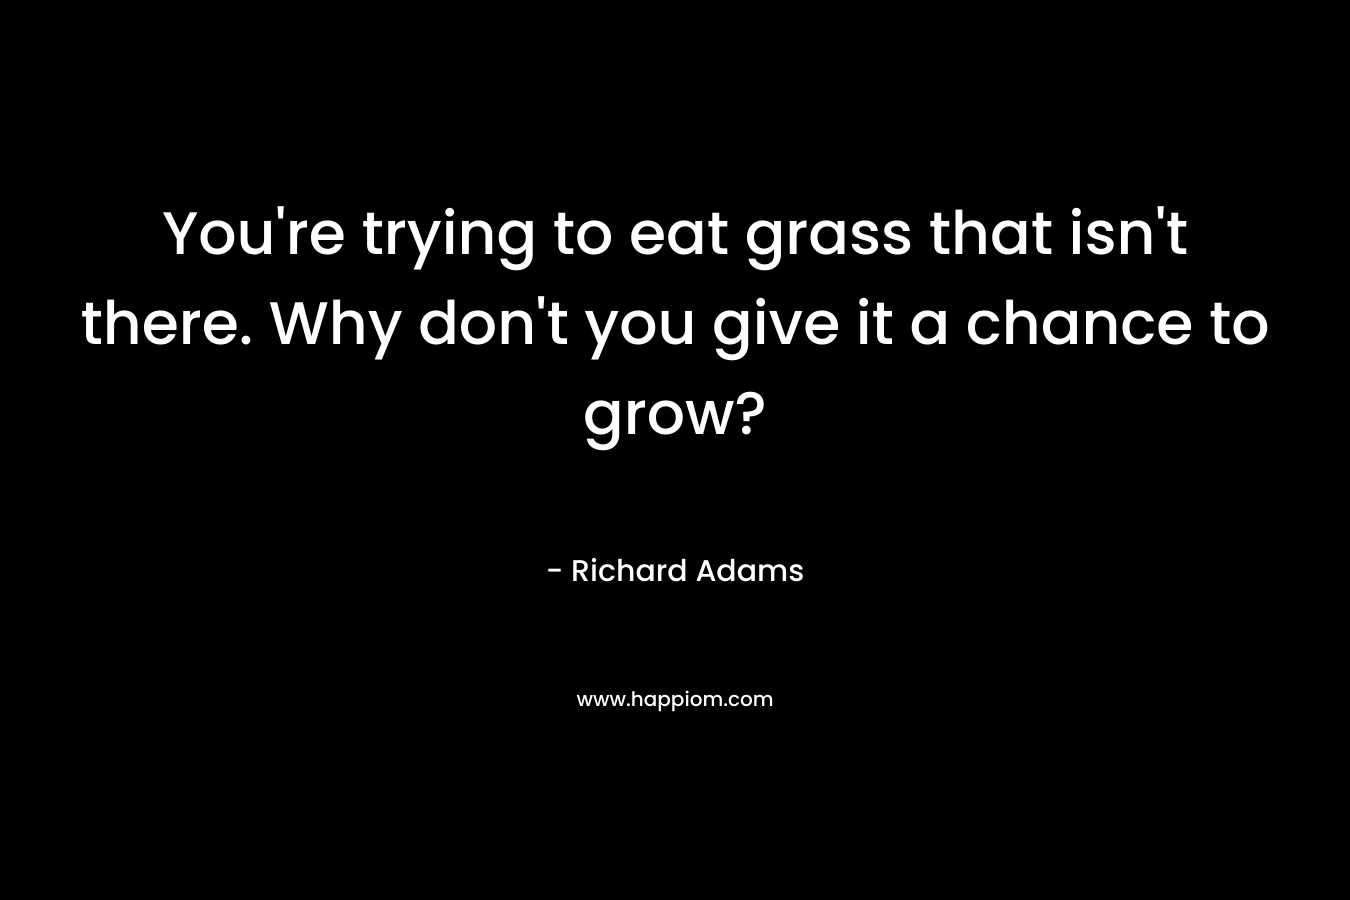 You're trying to eat grass that isn't there. Why don't you give it a chance to grow?